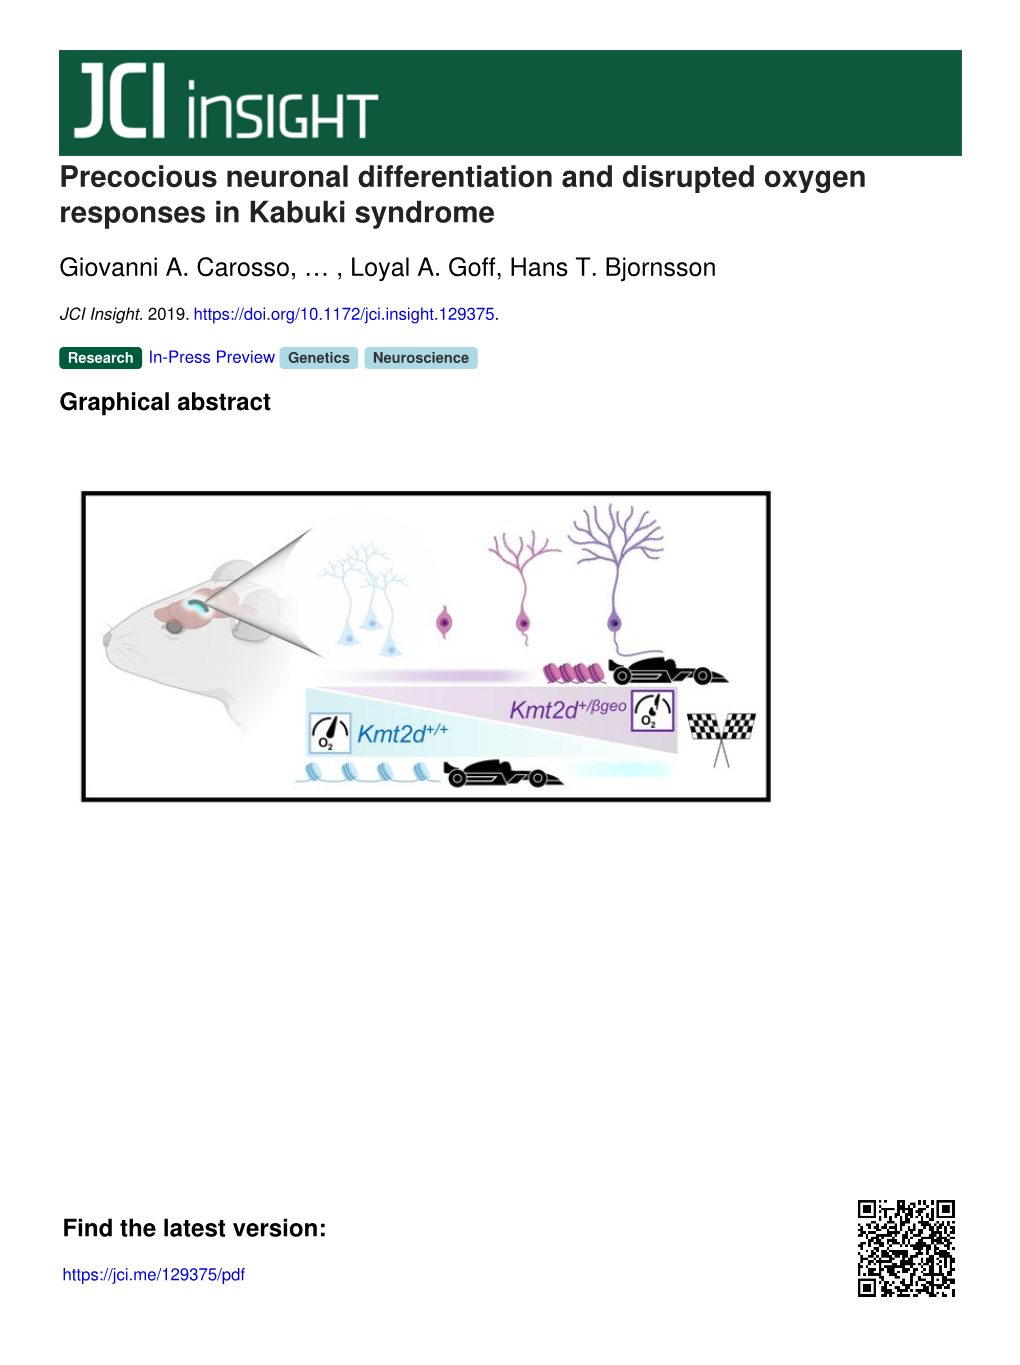 Precocious Neuronal Differentiation and Disrupted Oxygen Responses in Kabuki Syndrome